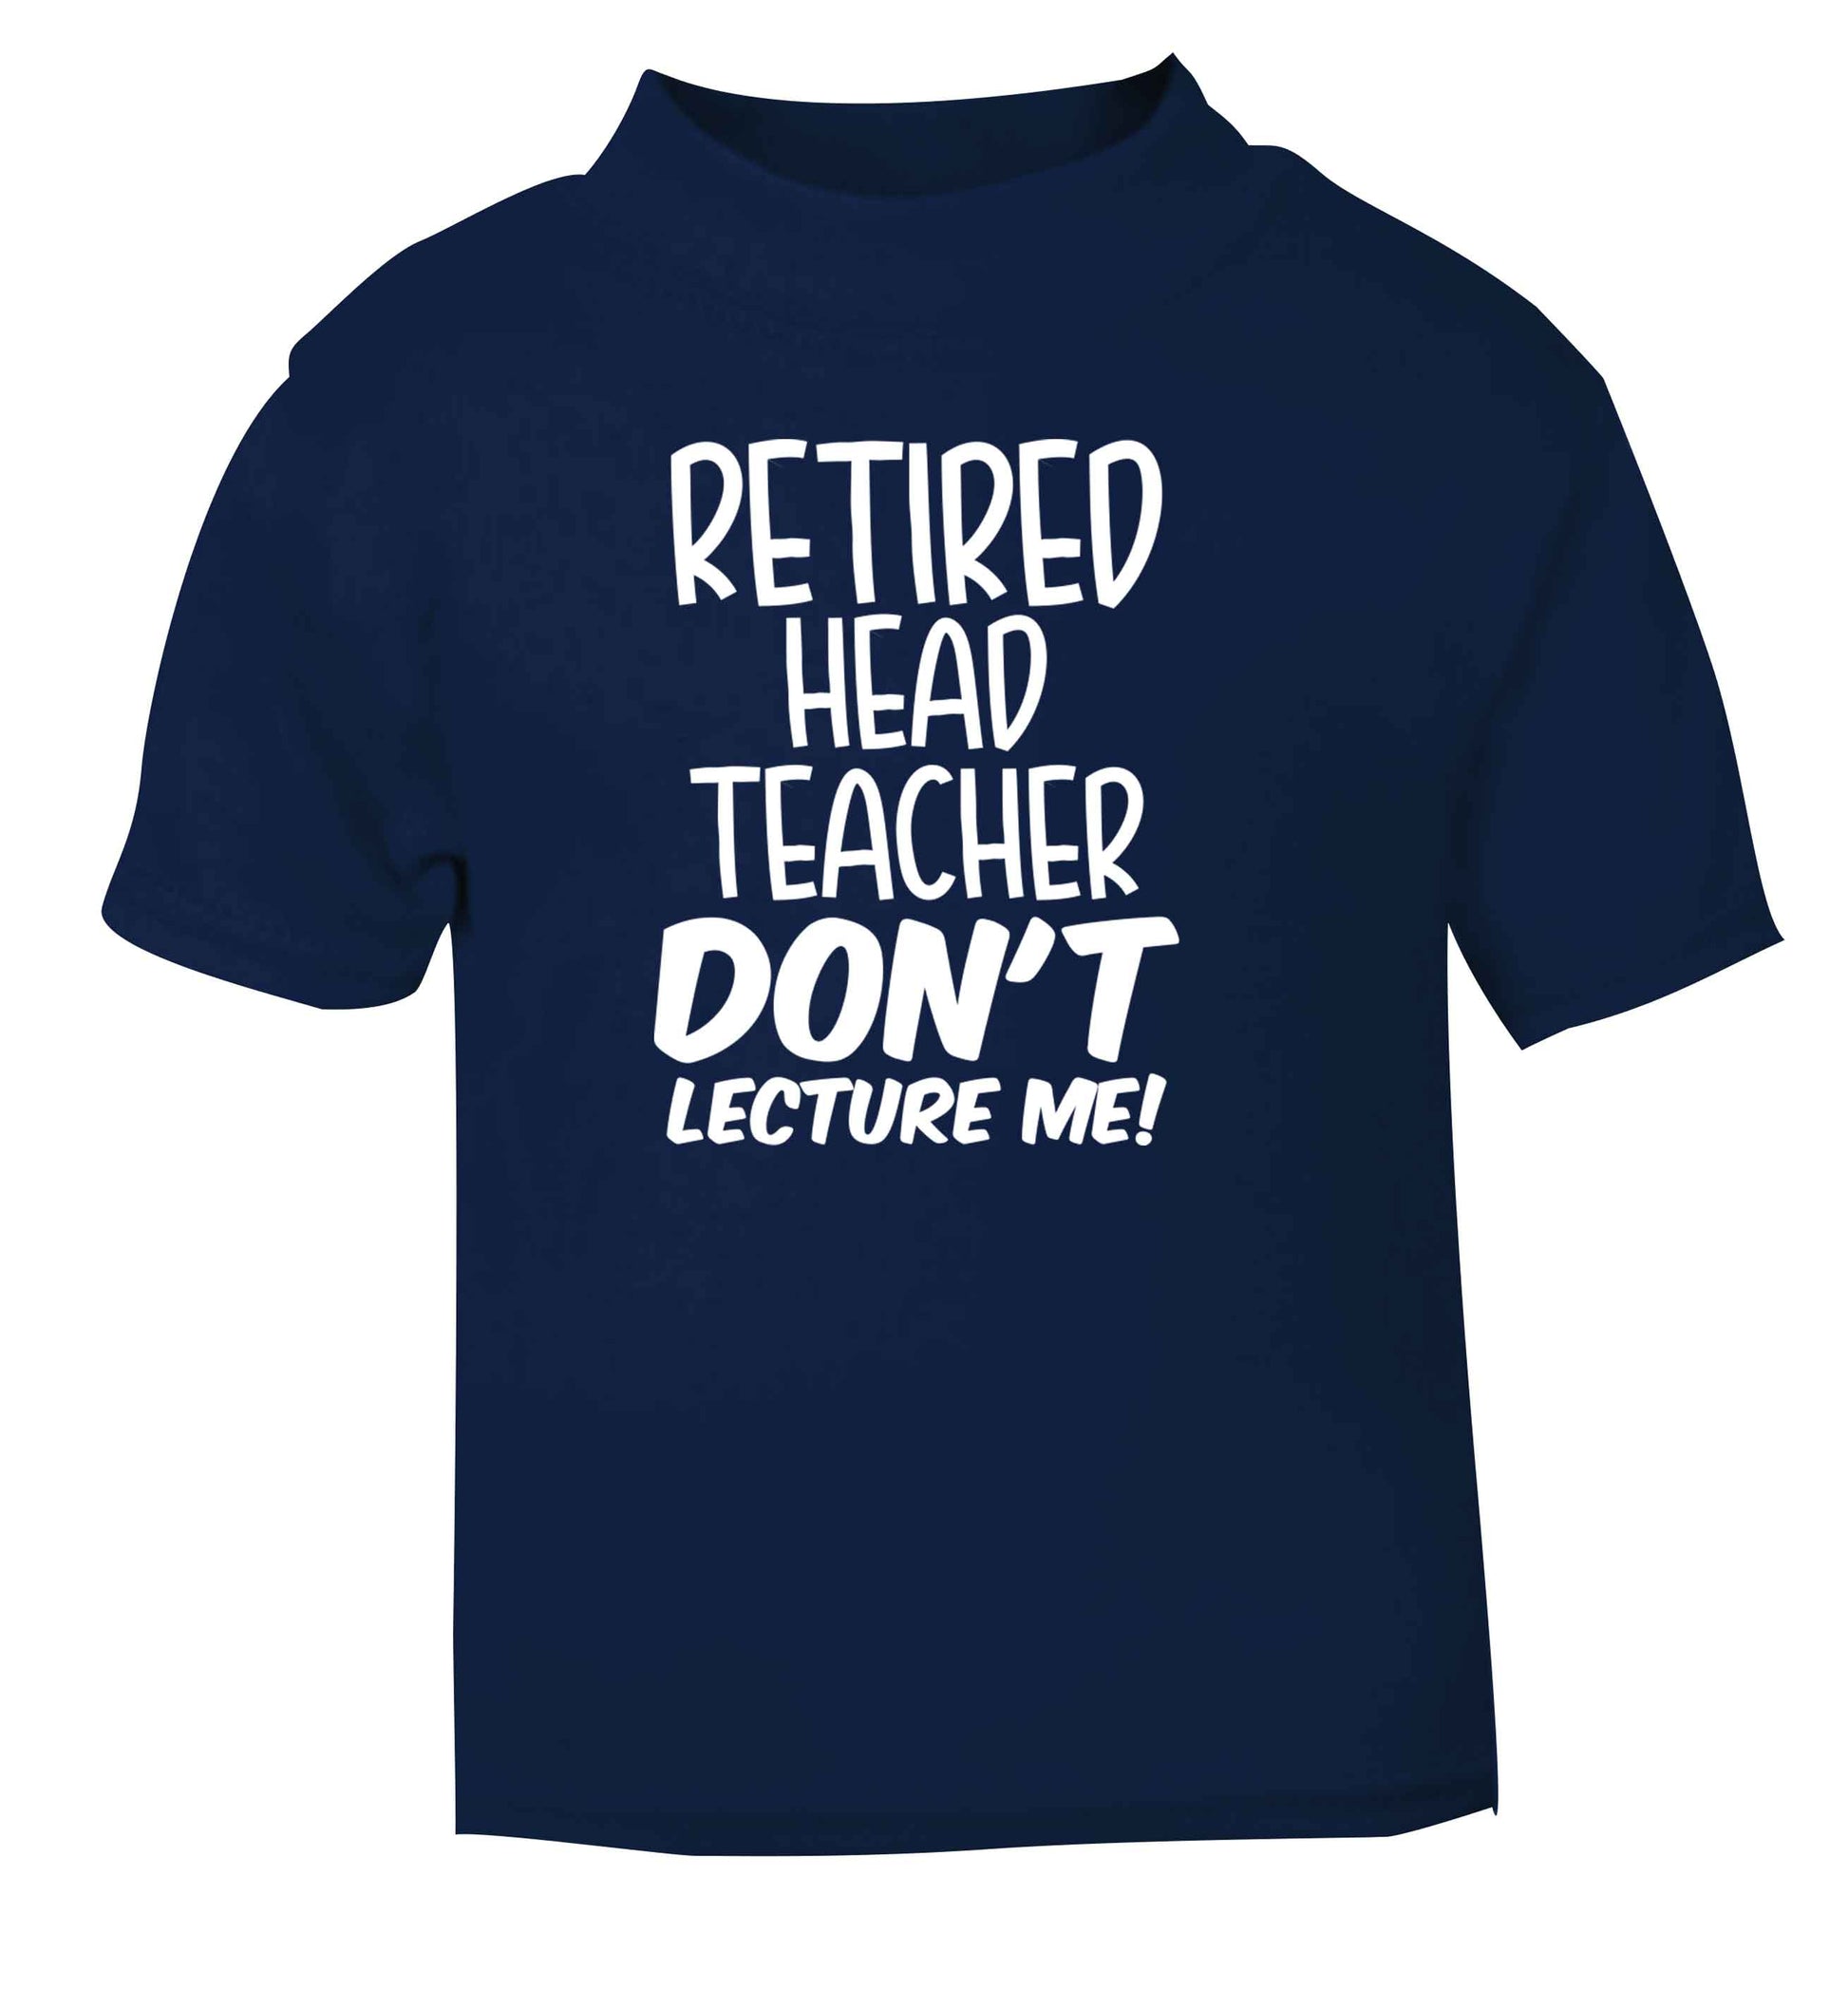 Retired head teacher don't lecture me! navy Baby Toddler Tshirt 2 Years